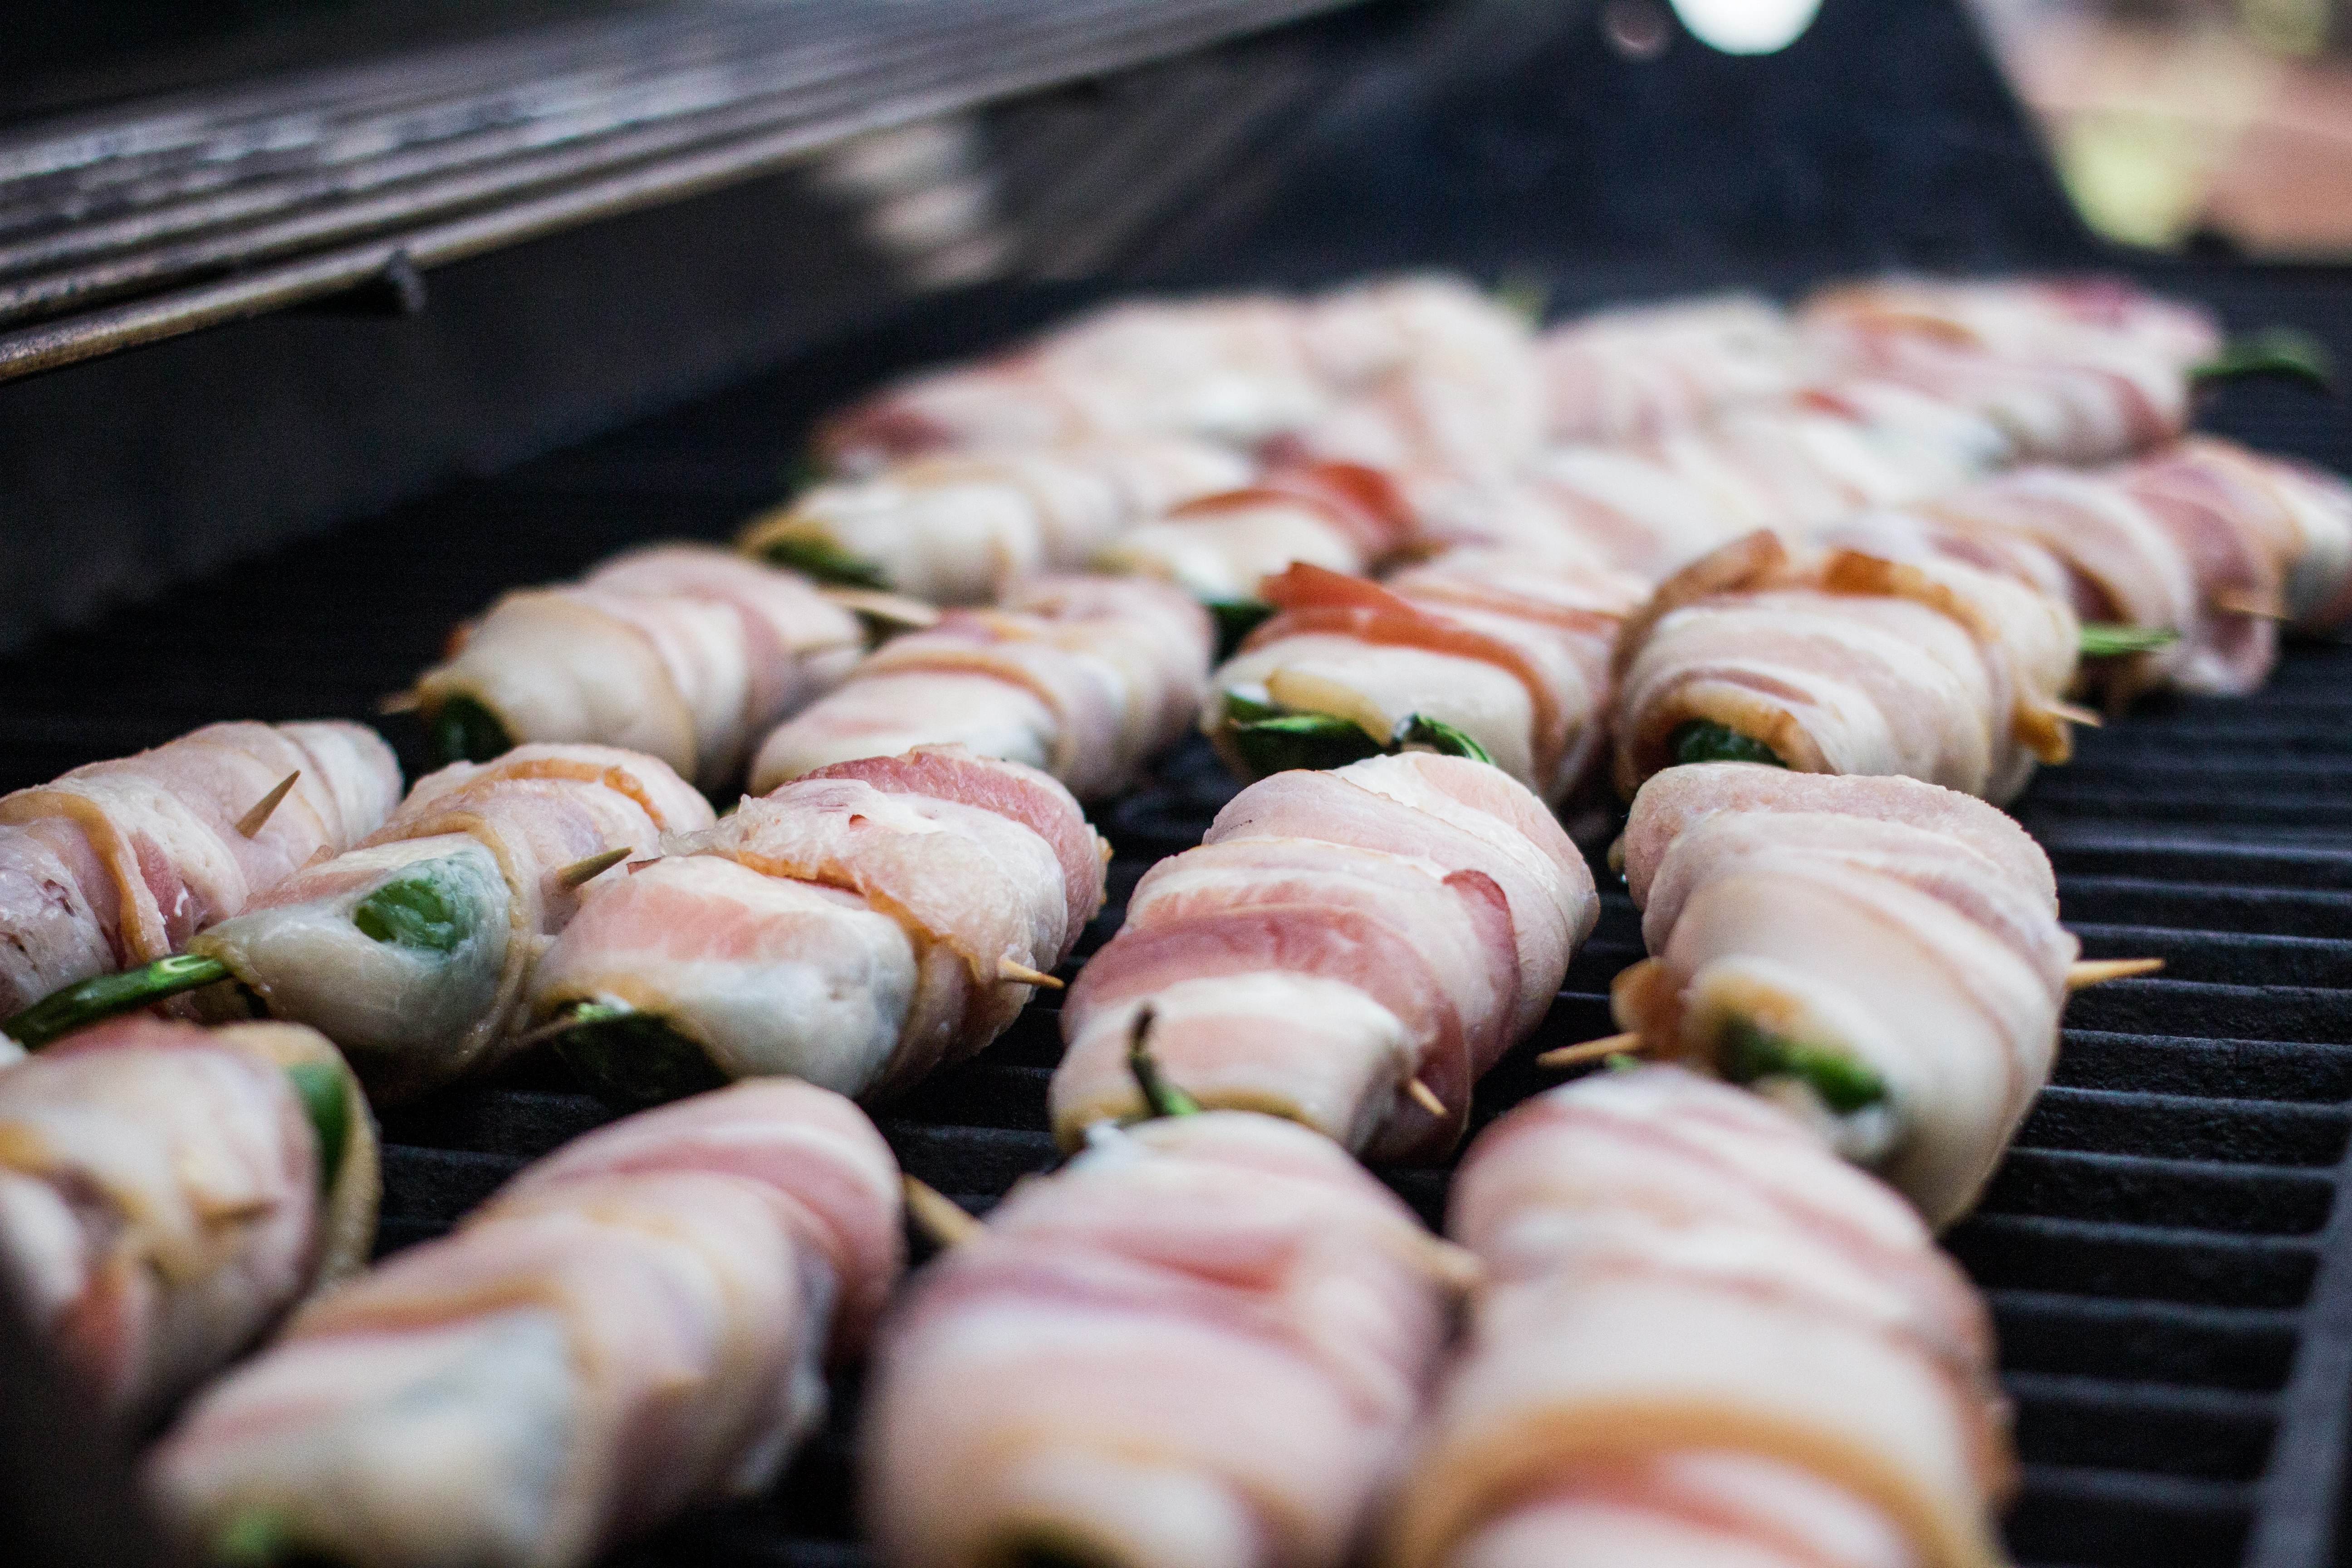 Jalapeno Poppers cooking on a propane grill. 

Bacon wrapped, cream cheese stuffed jalapenos are a must-have food for any cookout, BBQ or party.